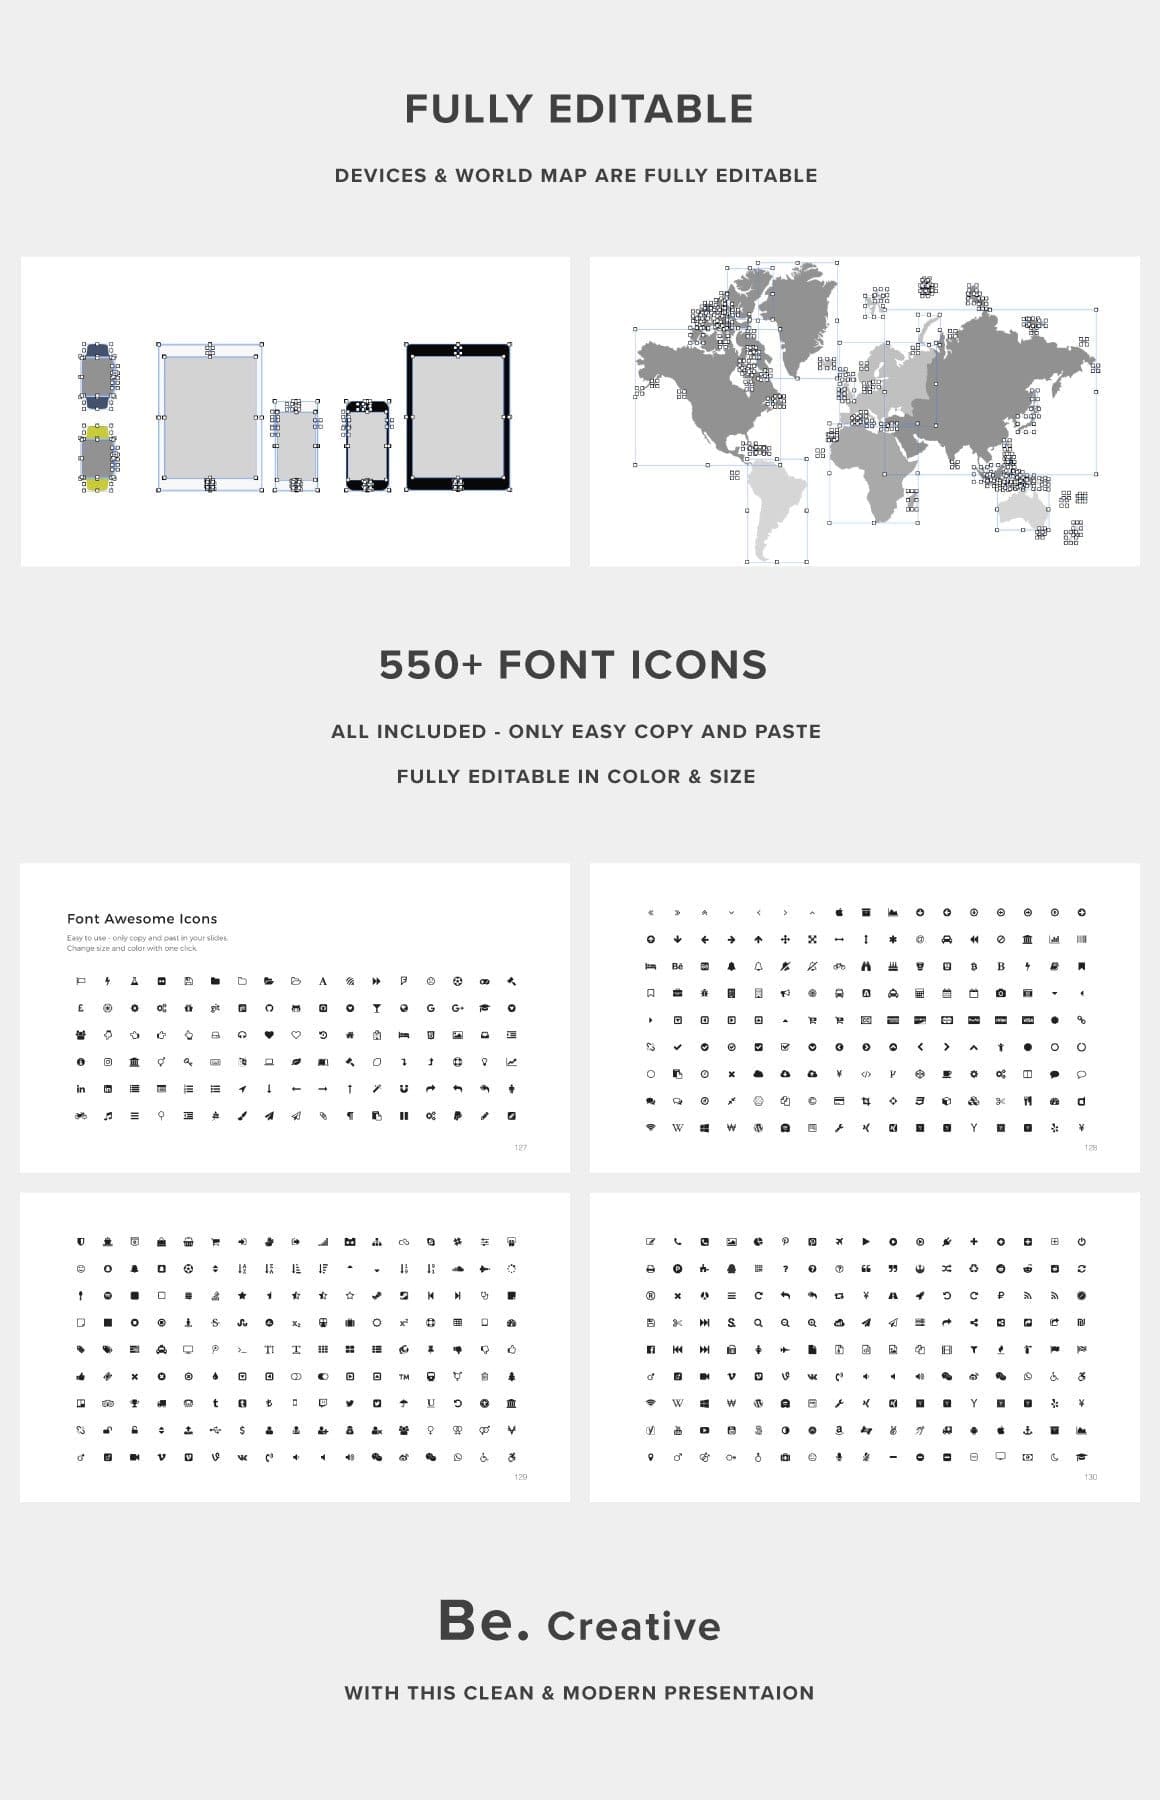 550+ font icons included only easy copy and paste.